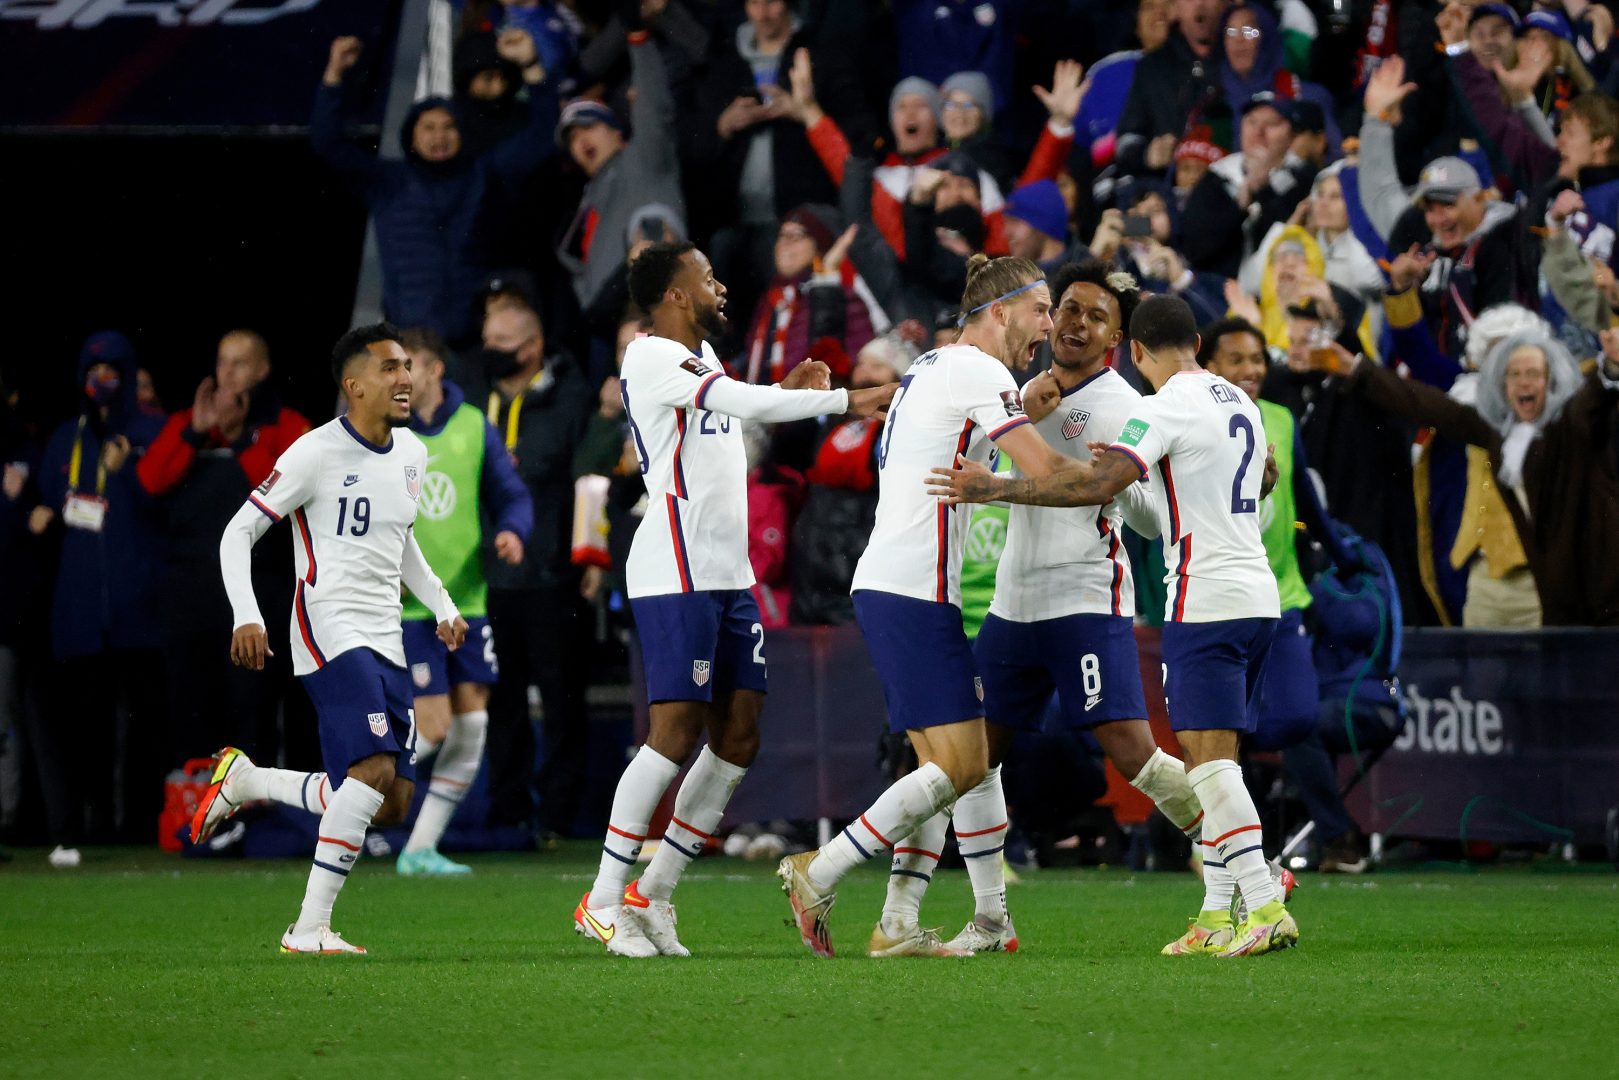 CINCINNATI, OH - NOVEMBER 12:  Weston McKennie #8 of the United States is congratulated by his teammates after scoring a goal during the FIFA World Cup 2022 Qualifier match against Mexico at TQL Stadium on November 12, 2021 in Cincinnati, Ohio. The United States defeated Mexico 2-0. 